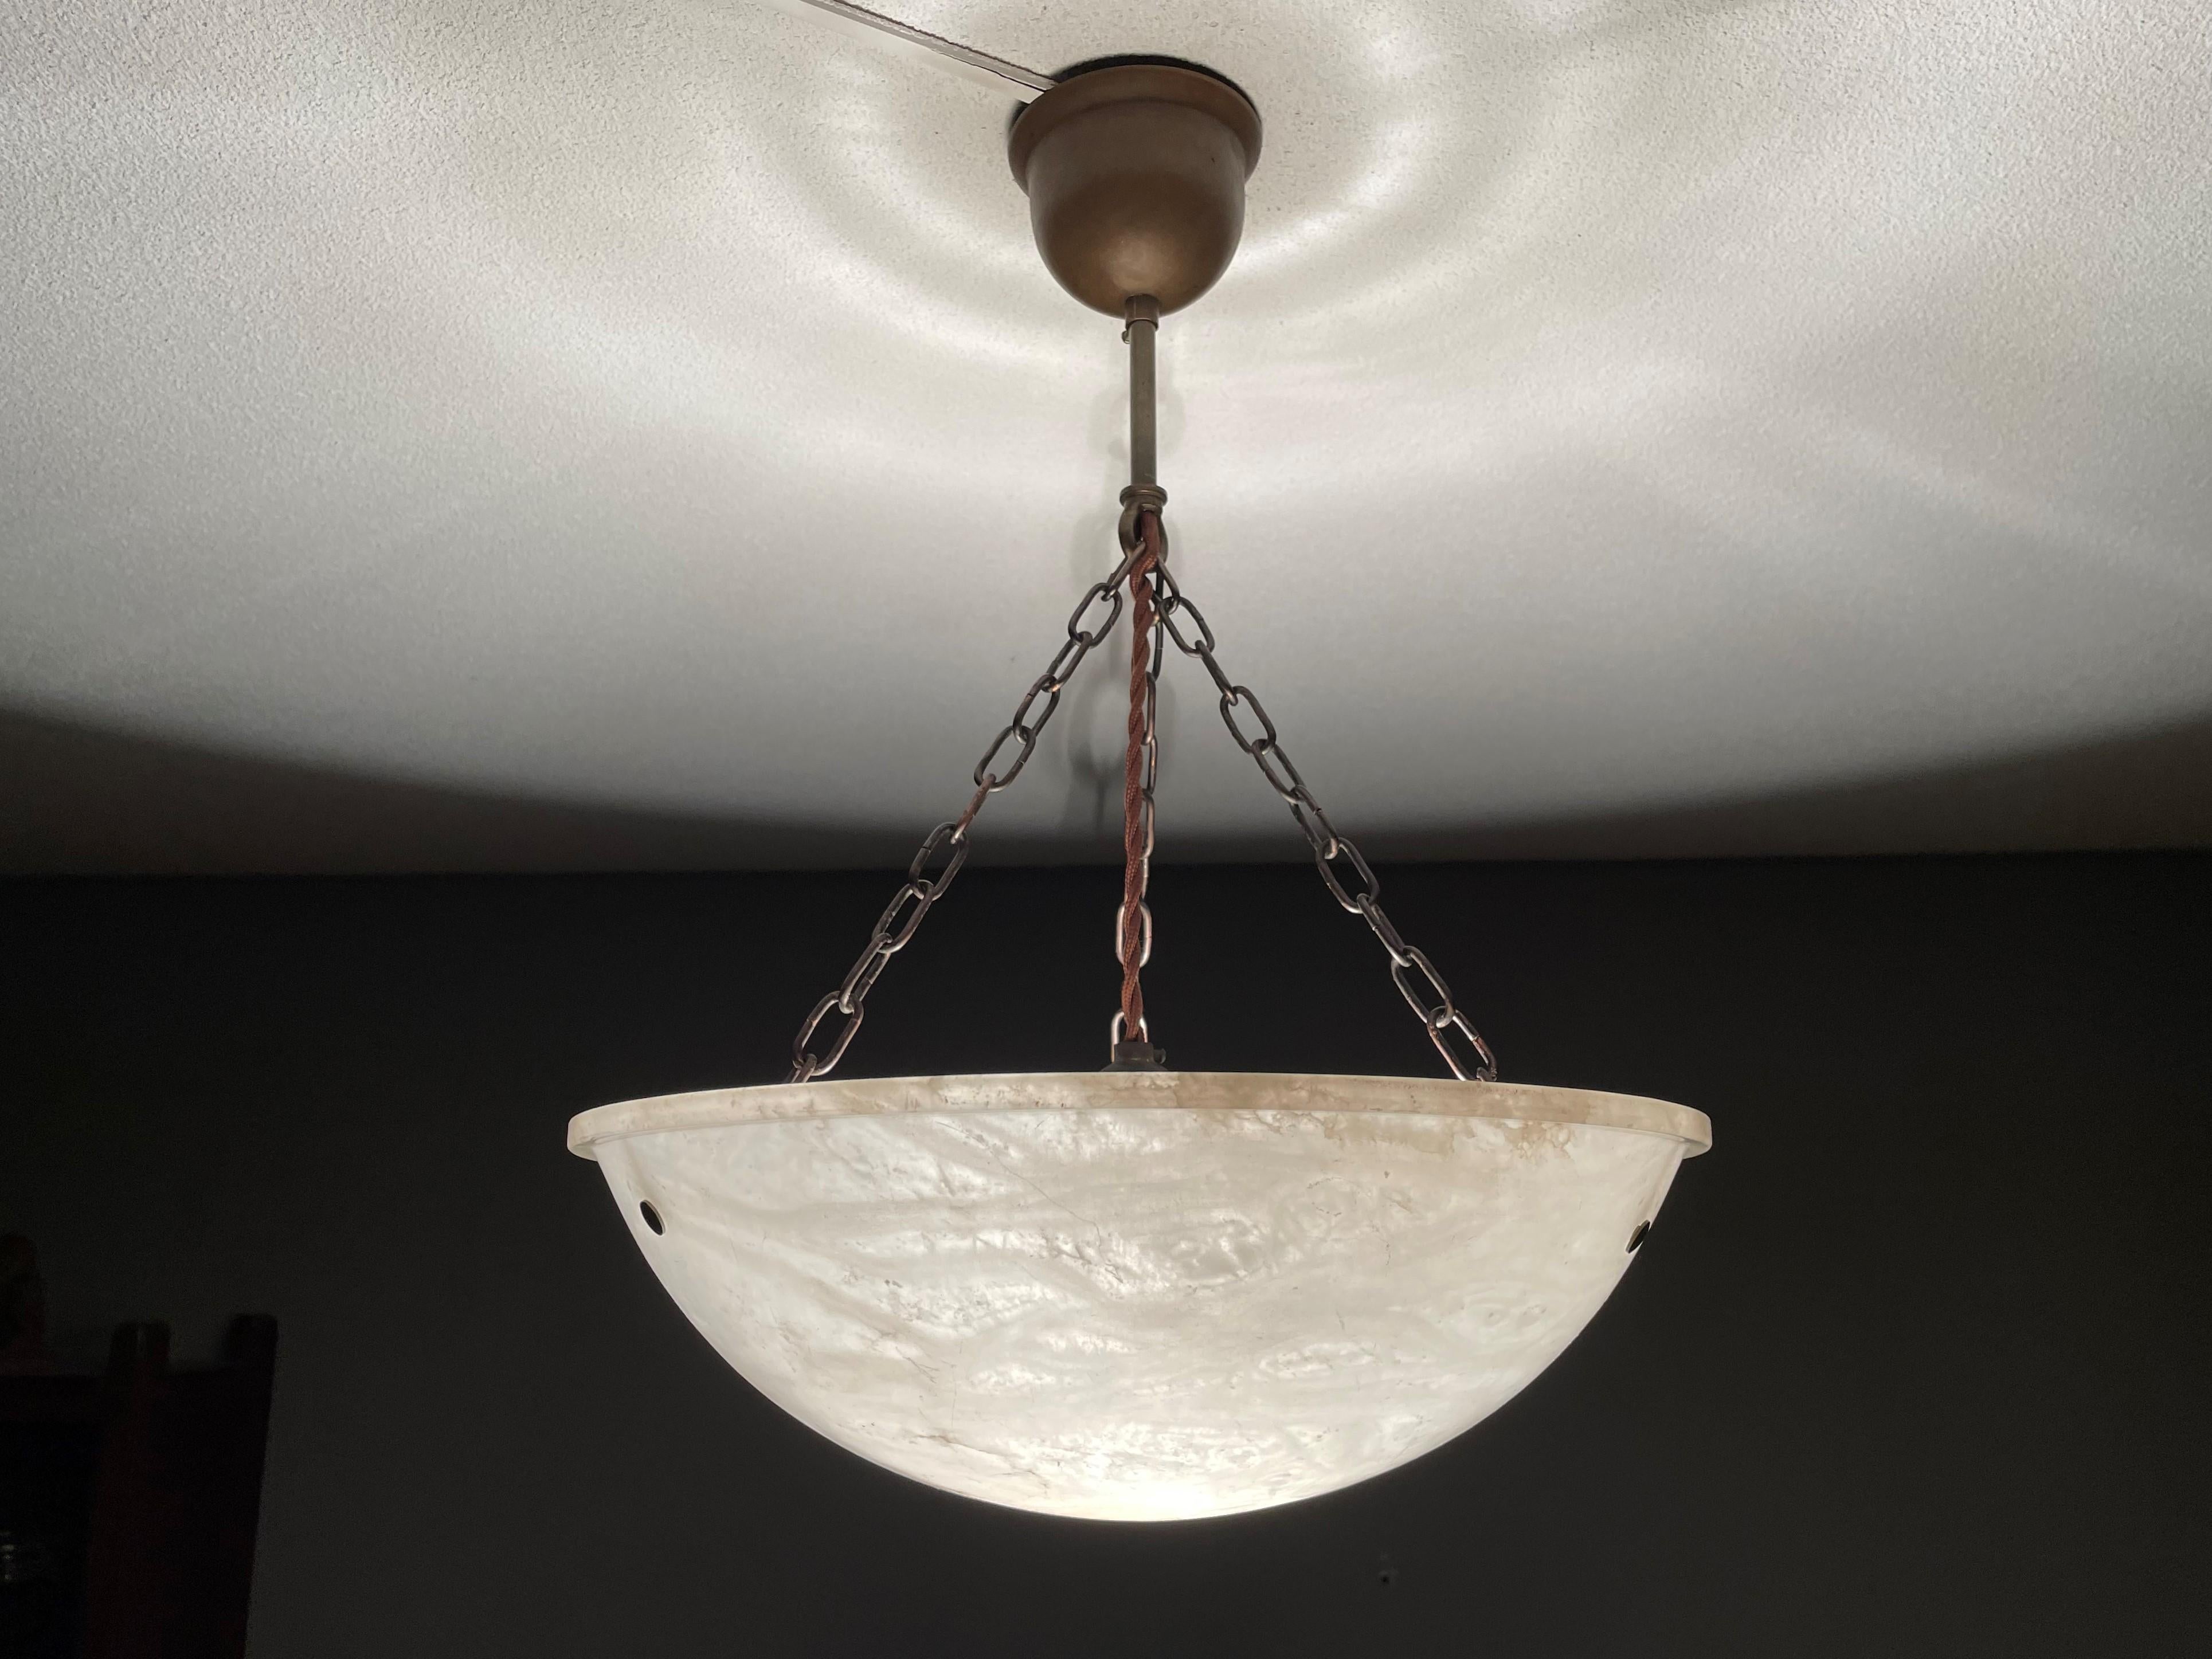 Lovely antique light fixture for an entry hall, bedroom or any other small room.

With early 20th century light fixtures being one of our specialities, we always love finding timeless pendants and flush mounts we have never seen before. This